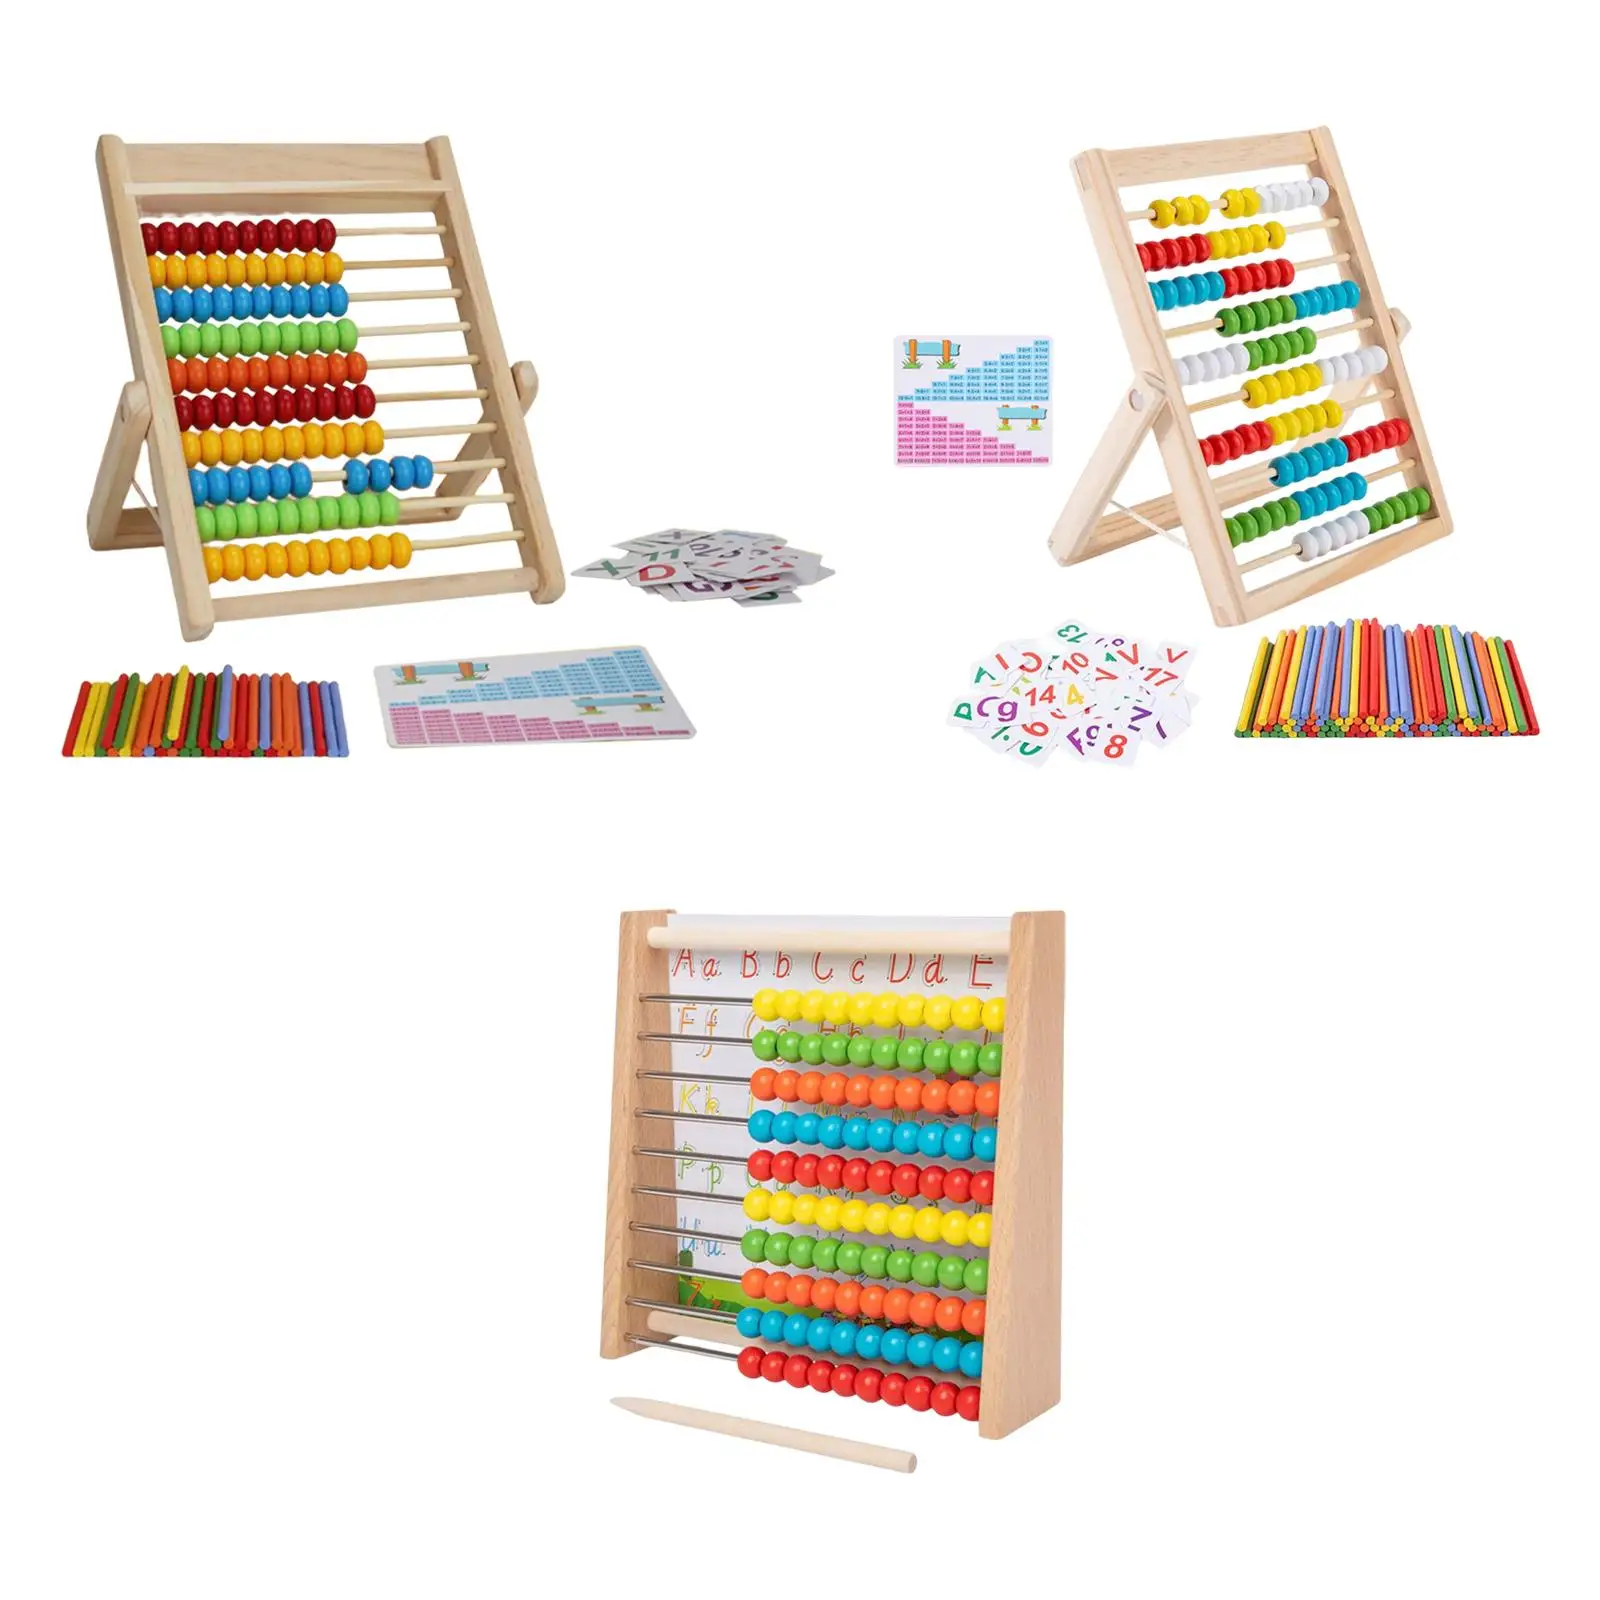 Wooden Abacus Classic Counting Tool Counting Frame Educational Toy Addition and Subtraction Kids Learning Math for Holiday Gifts